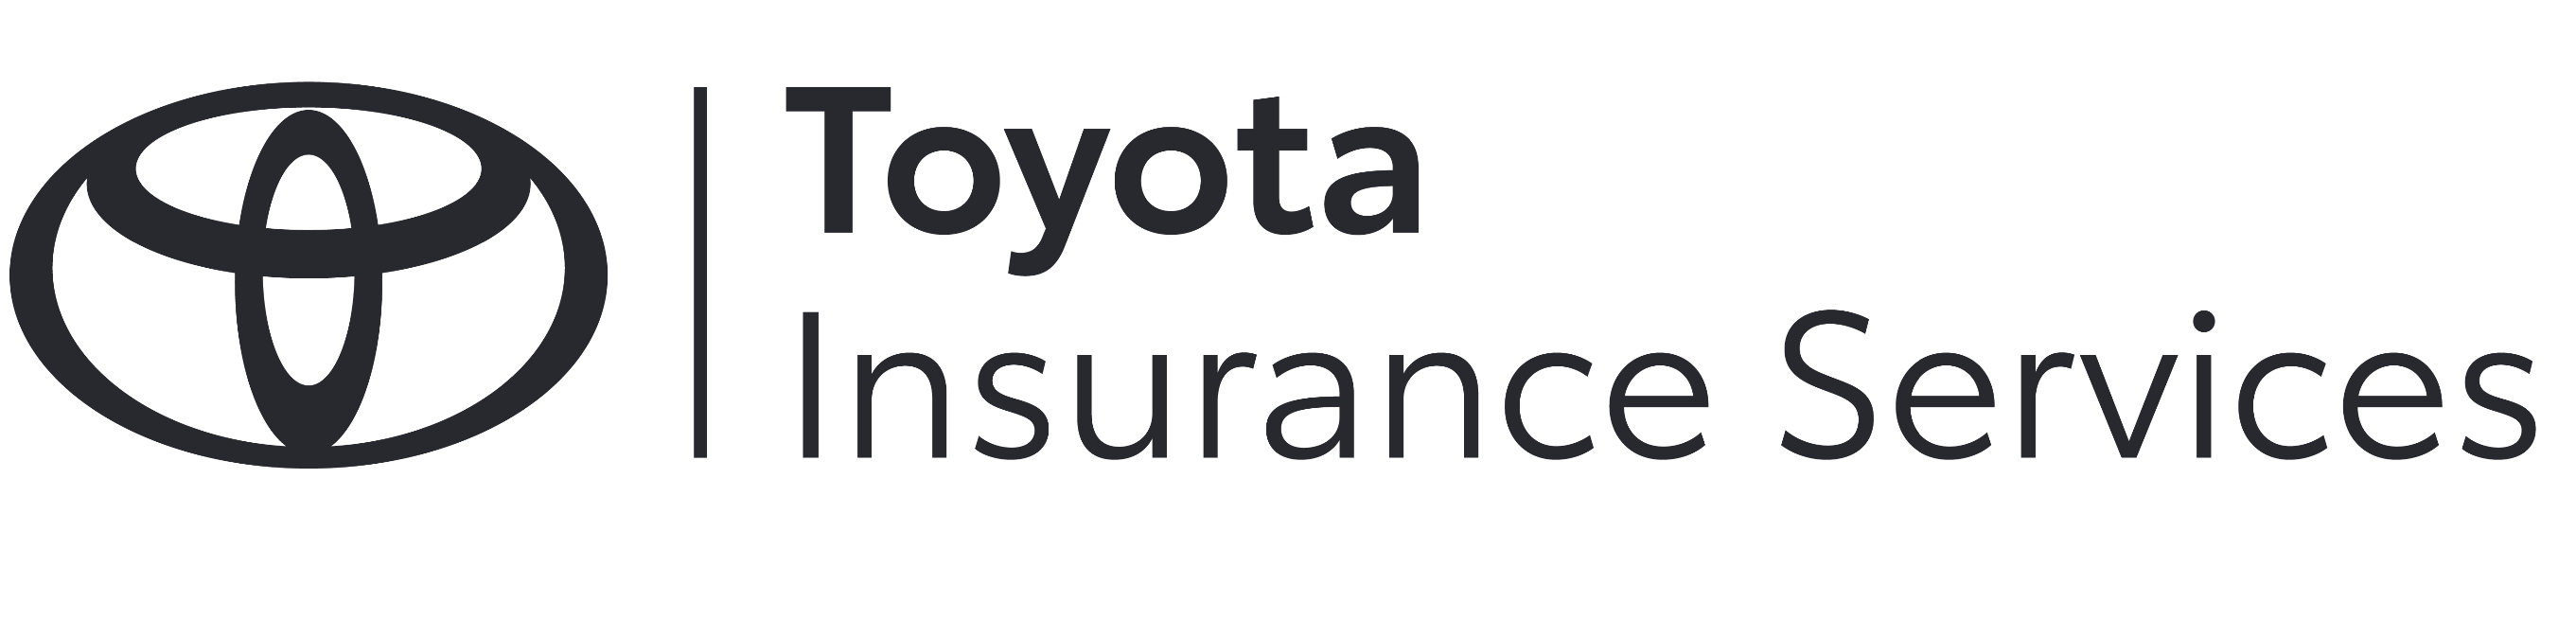  Toyota Insurance Services